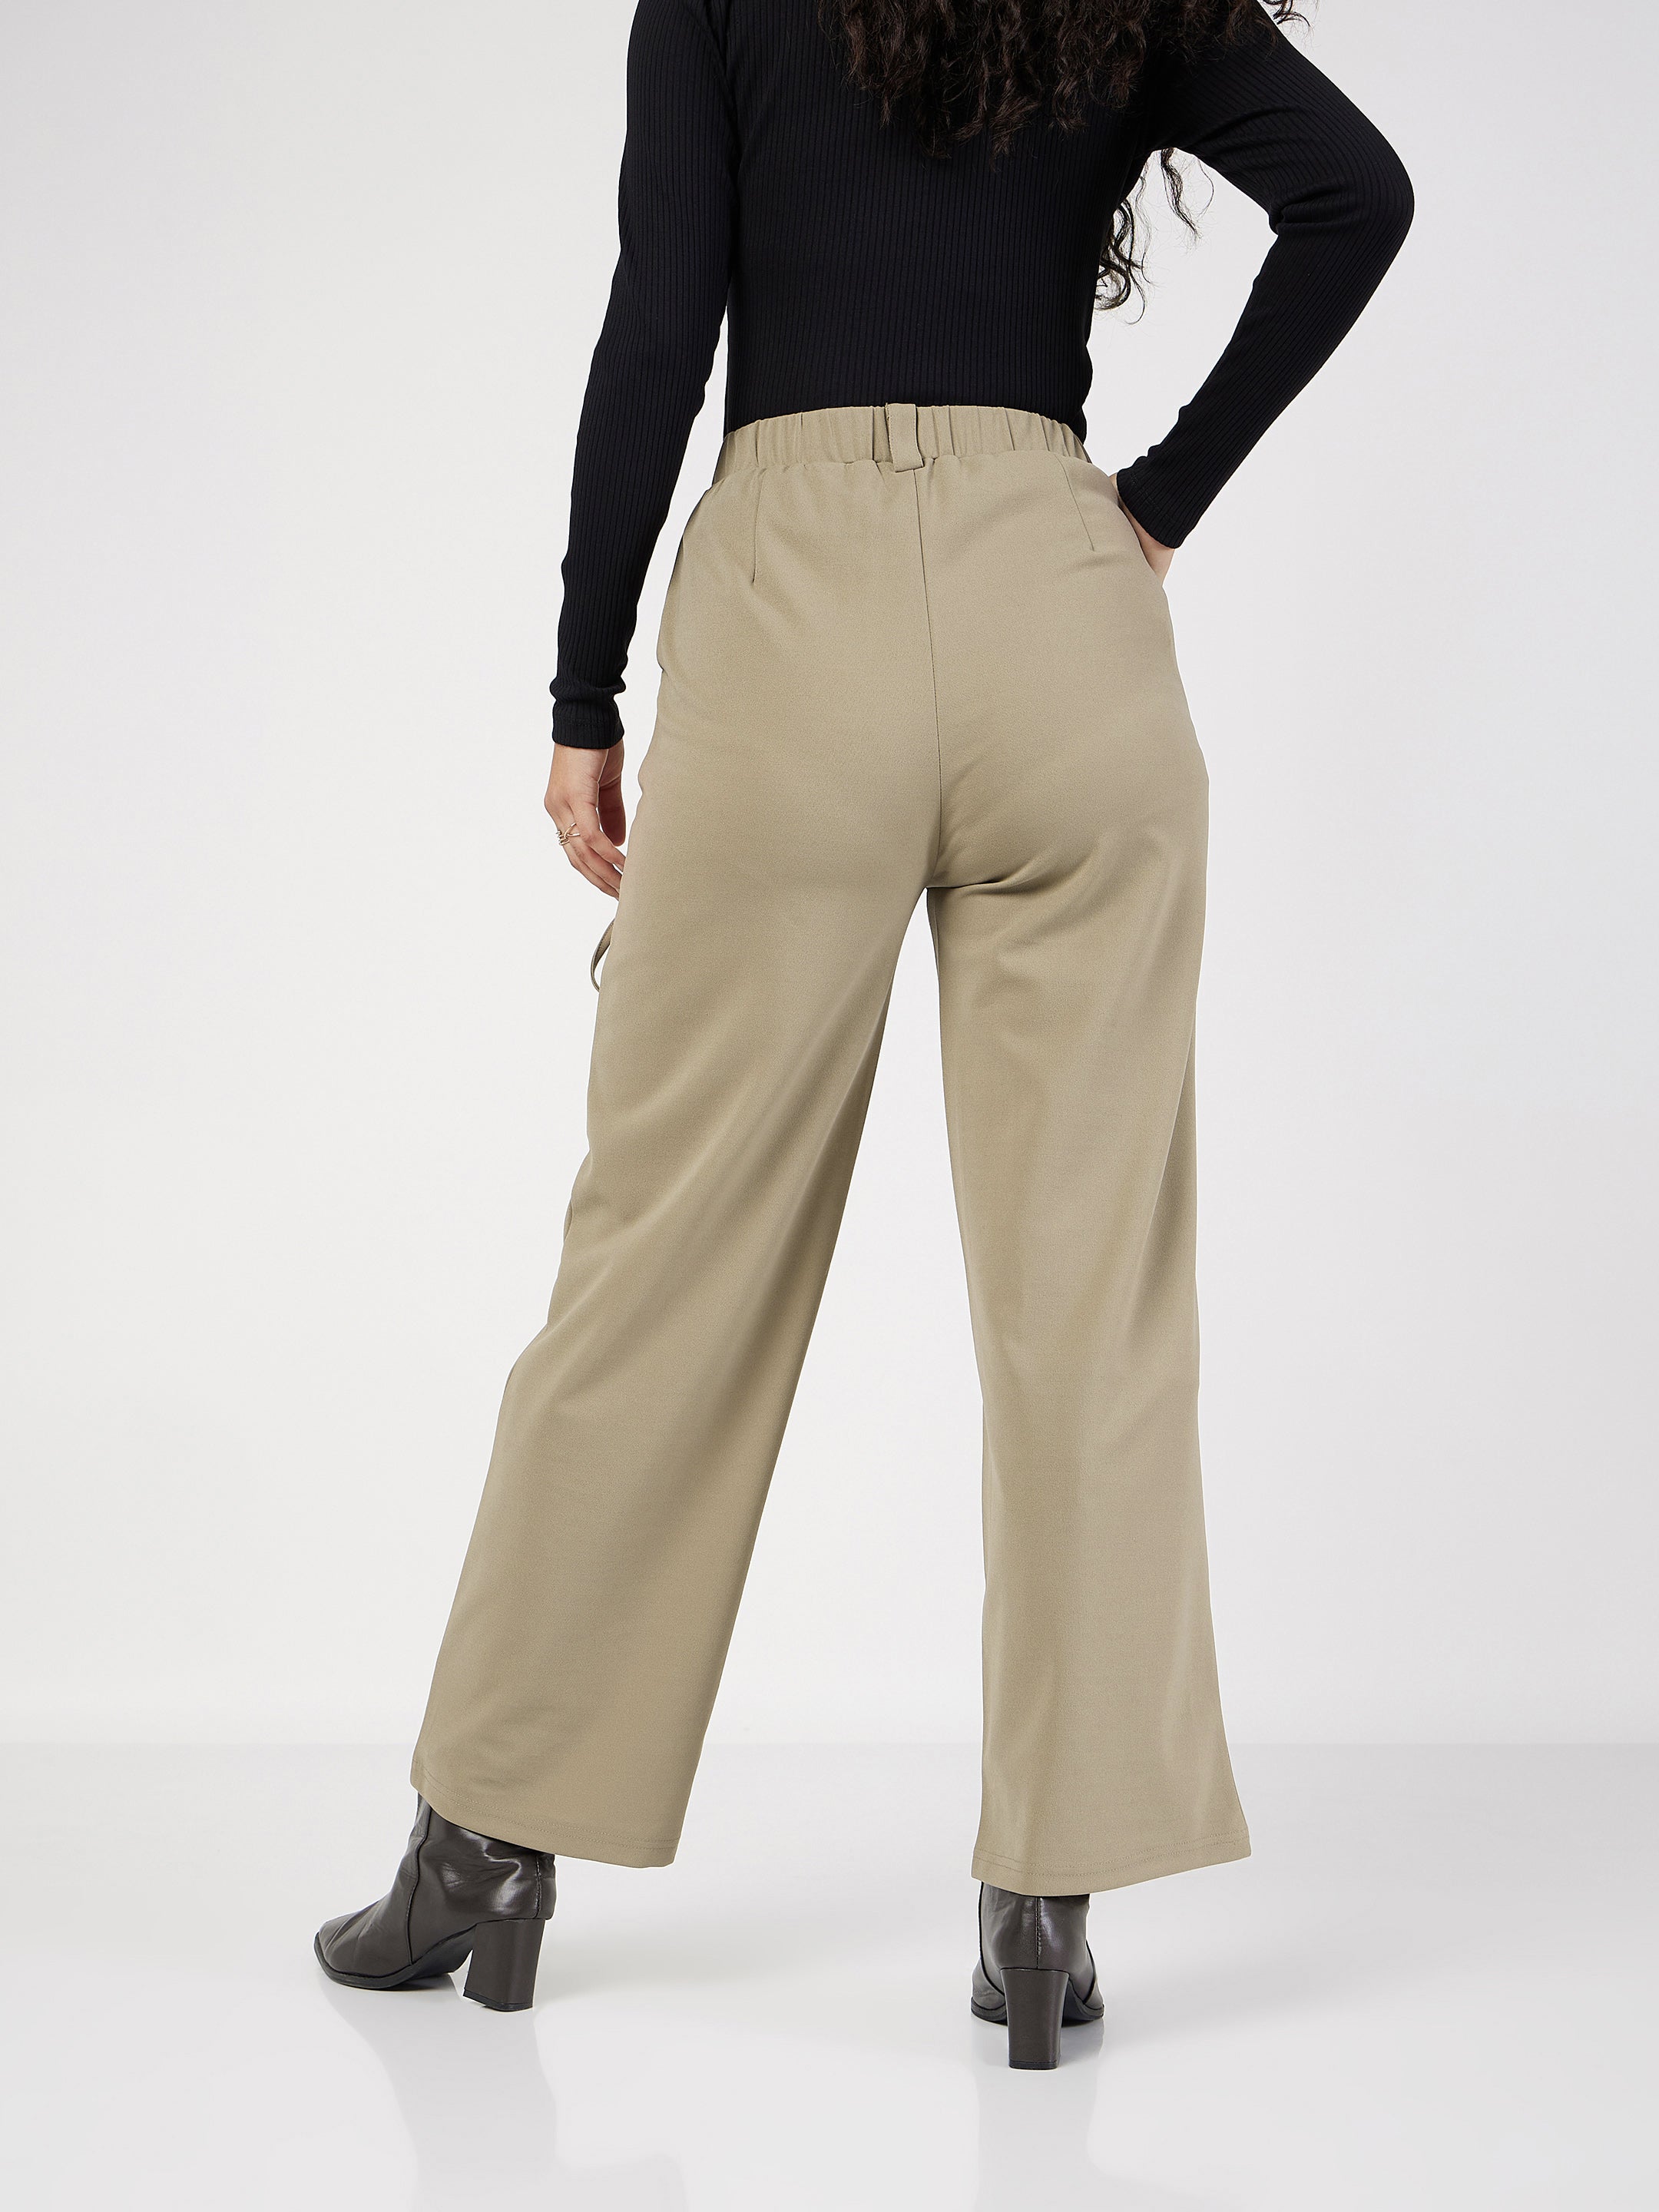 Polo Ralph Lauren Burroughs Relaxed Fit Ripstop Cargo Pant - Cargo pants -  Boozt.com